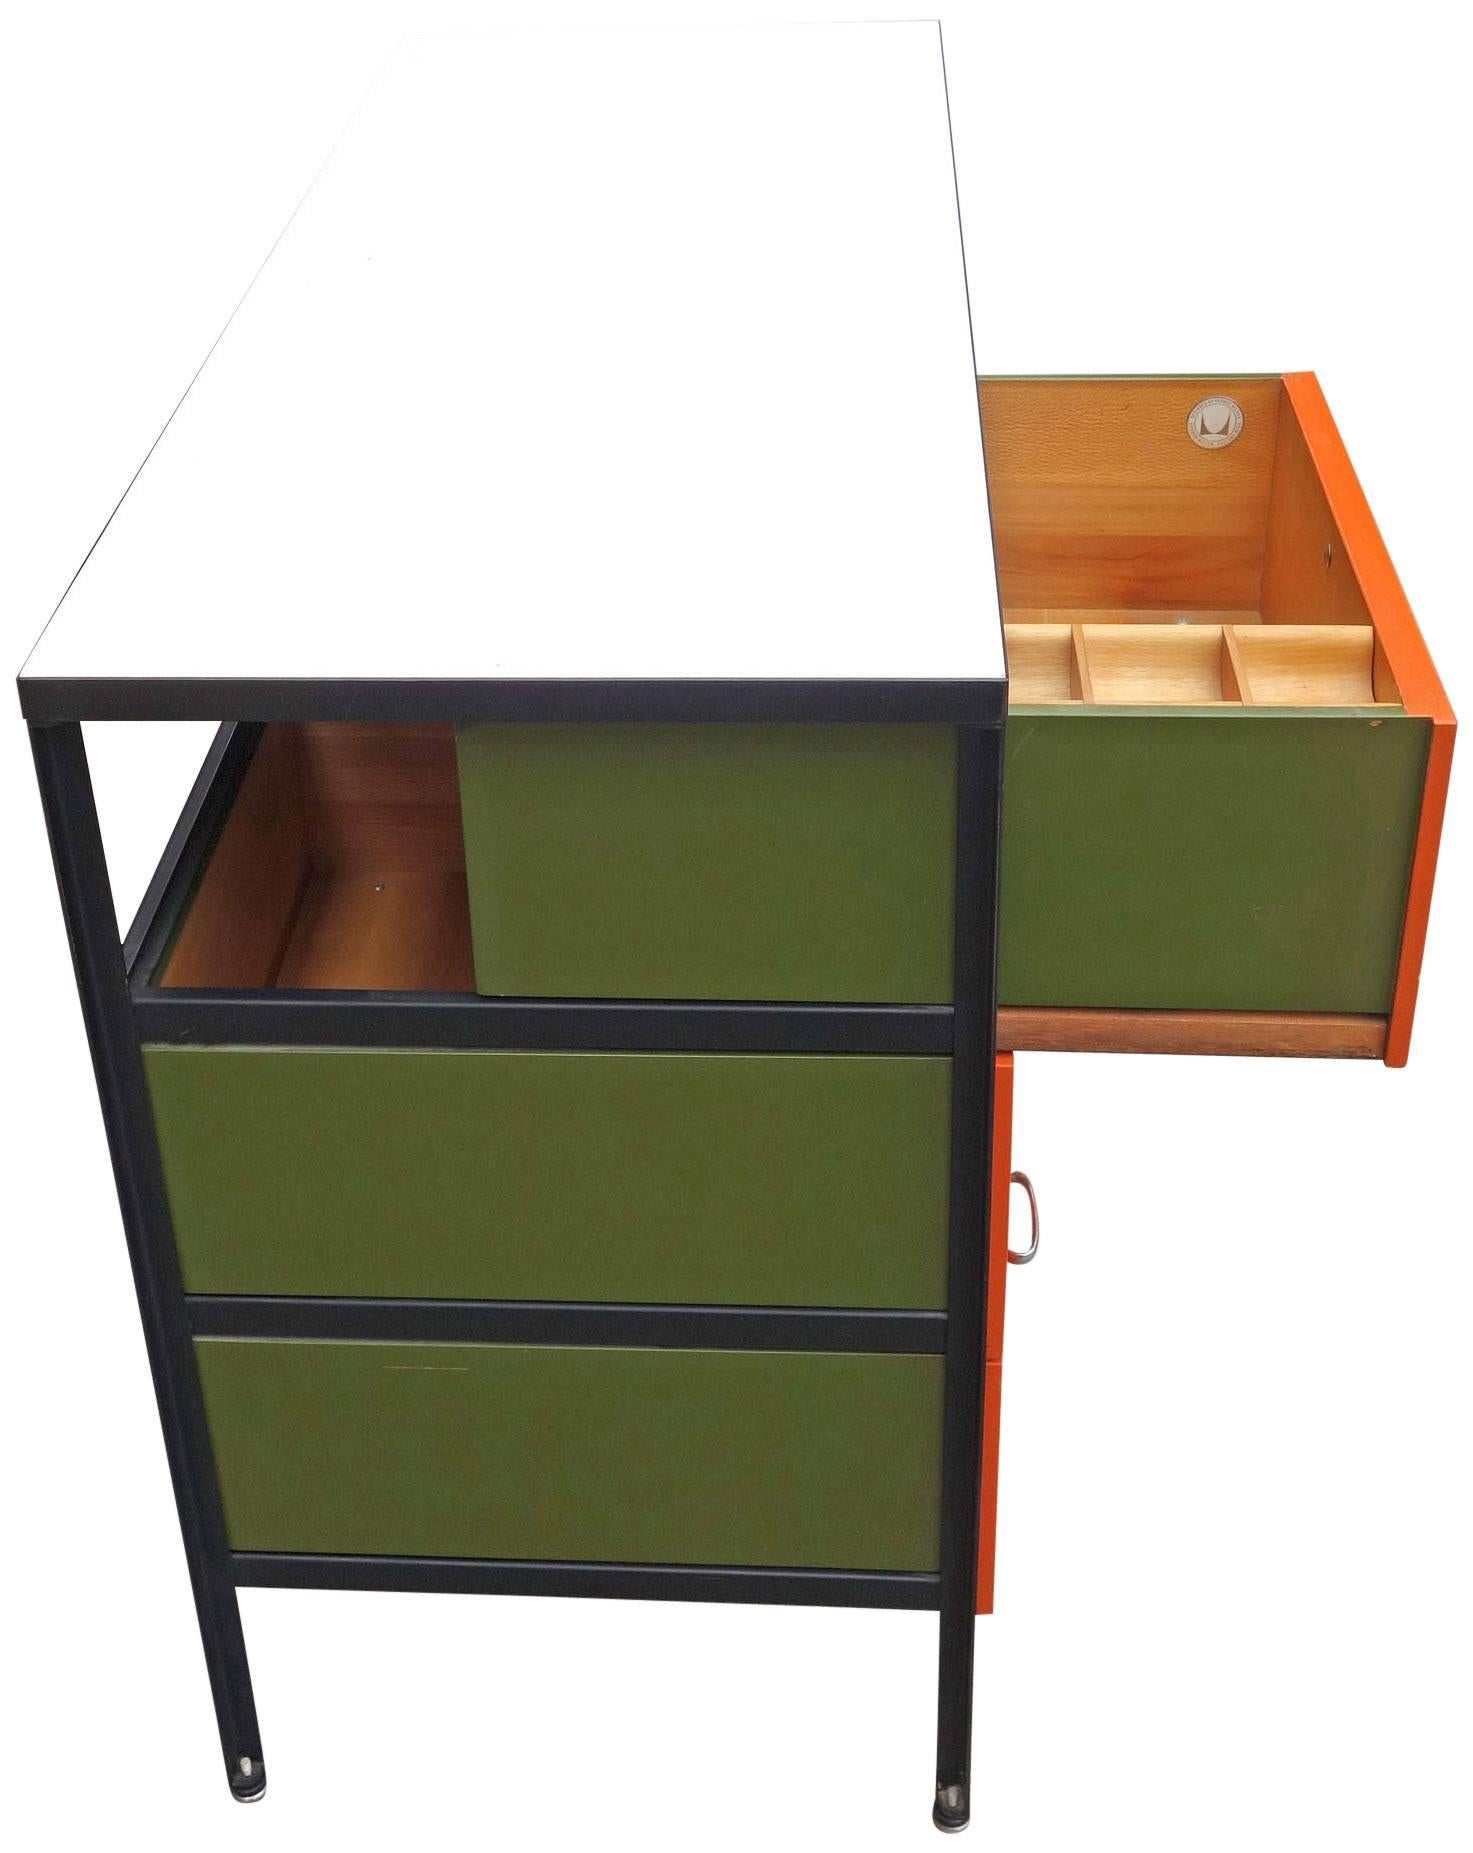 One of our favorites, the George Nelson designed steel frame series is both practical and beautiful. Originally available in many different color combinations the orange / green / black combination in perhaps the rarest. All steel frame cabinets